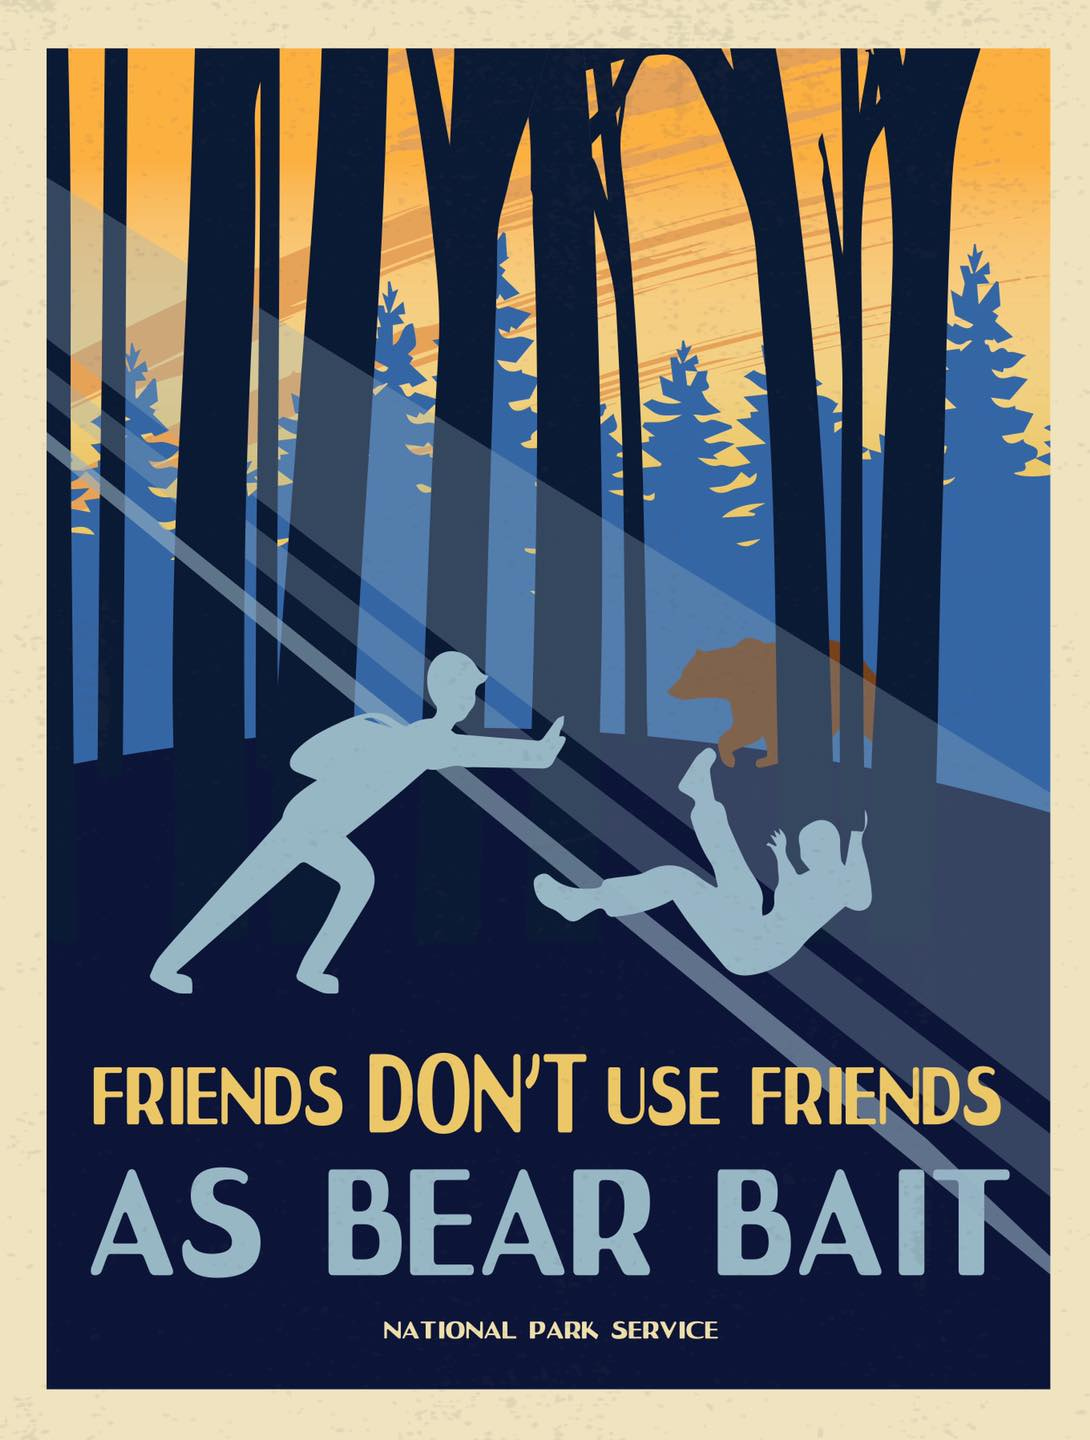 an image of text that says 'FRIENDS DON'T USE FRIENDS AS BEAR BAIT NATIONAL PARK SERVICE'